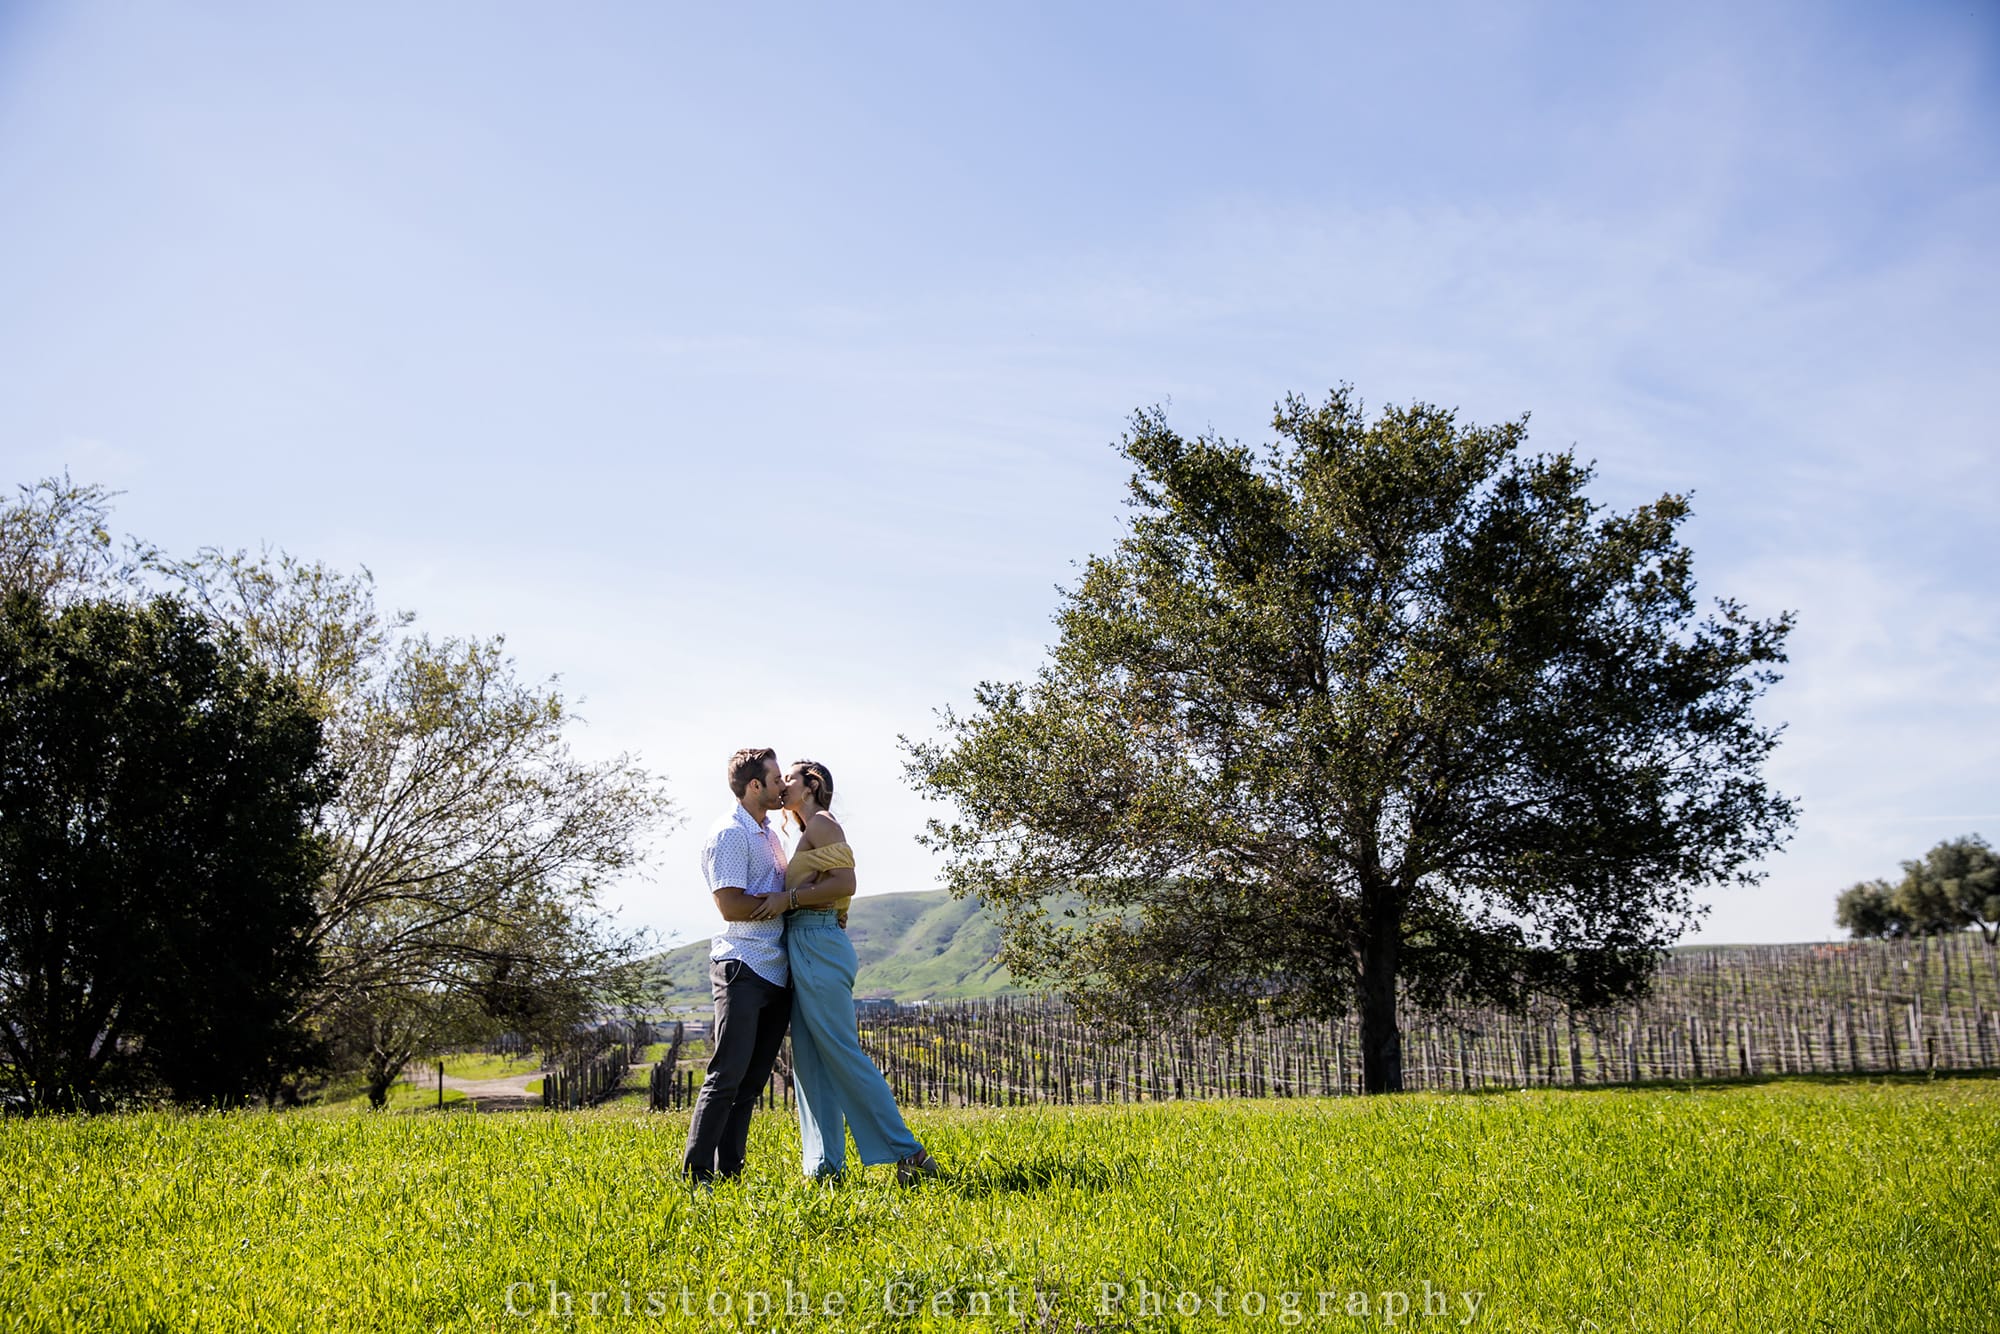 Best Proposal wineries in Sonoma ca - Ram's Gate winery